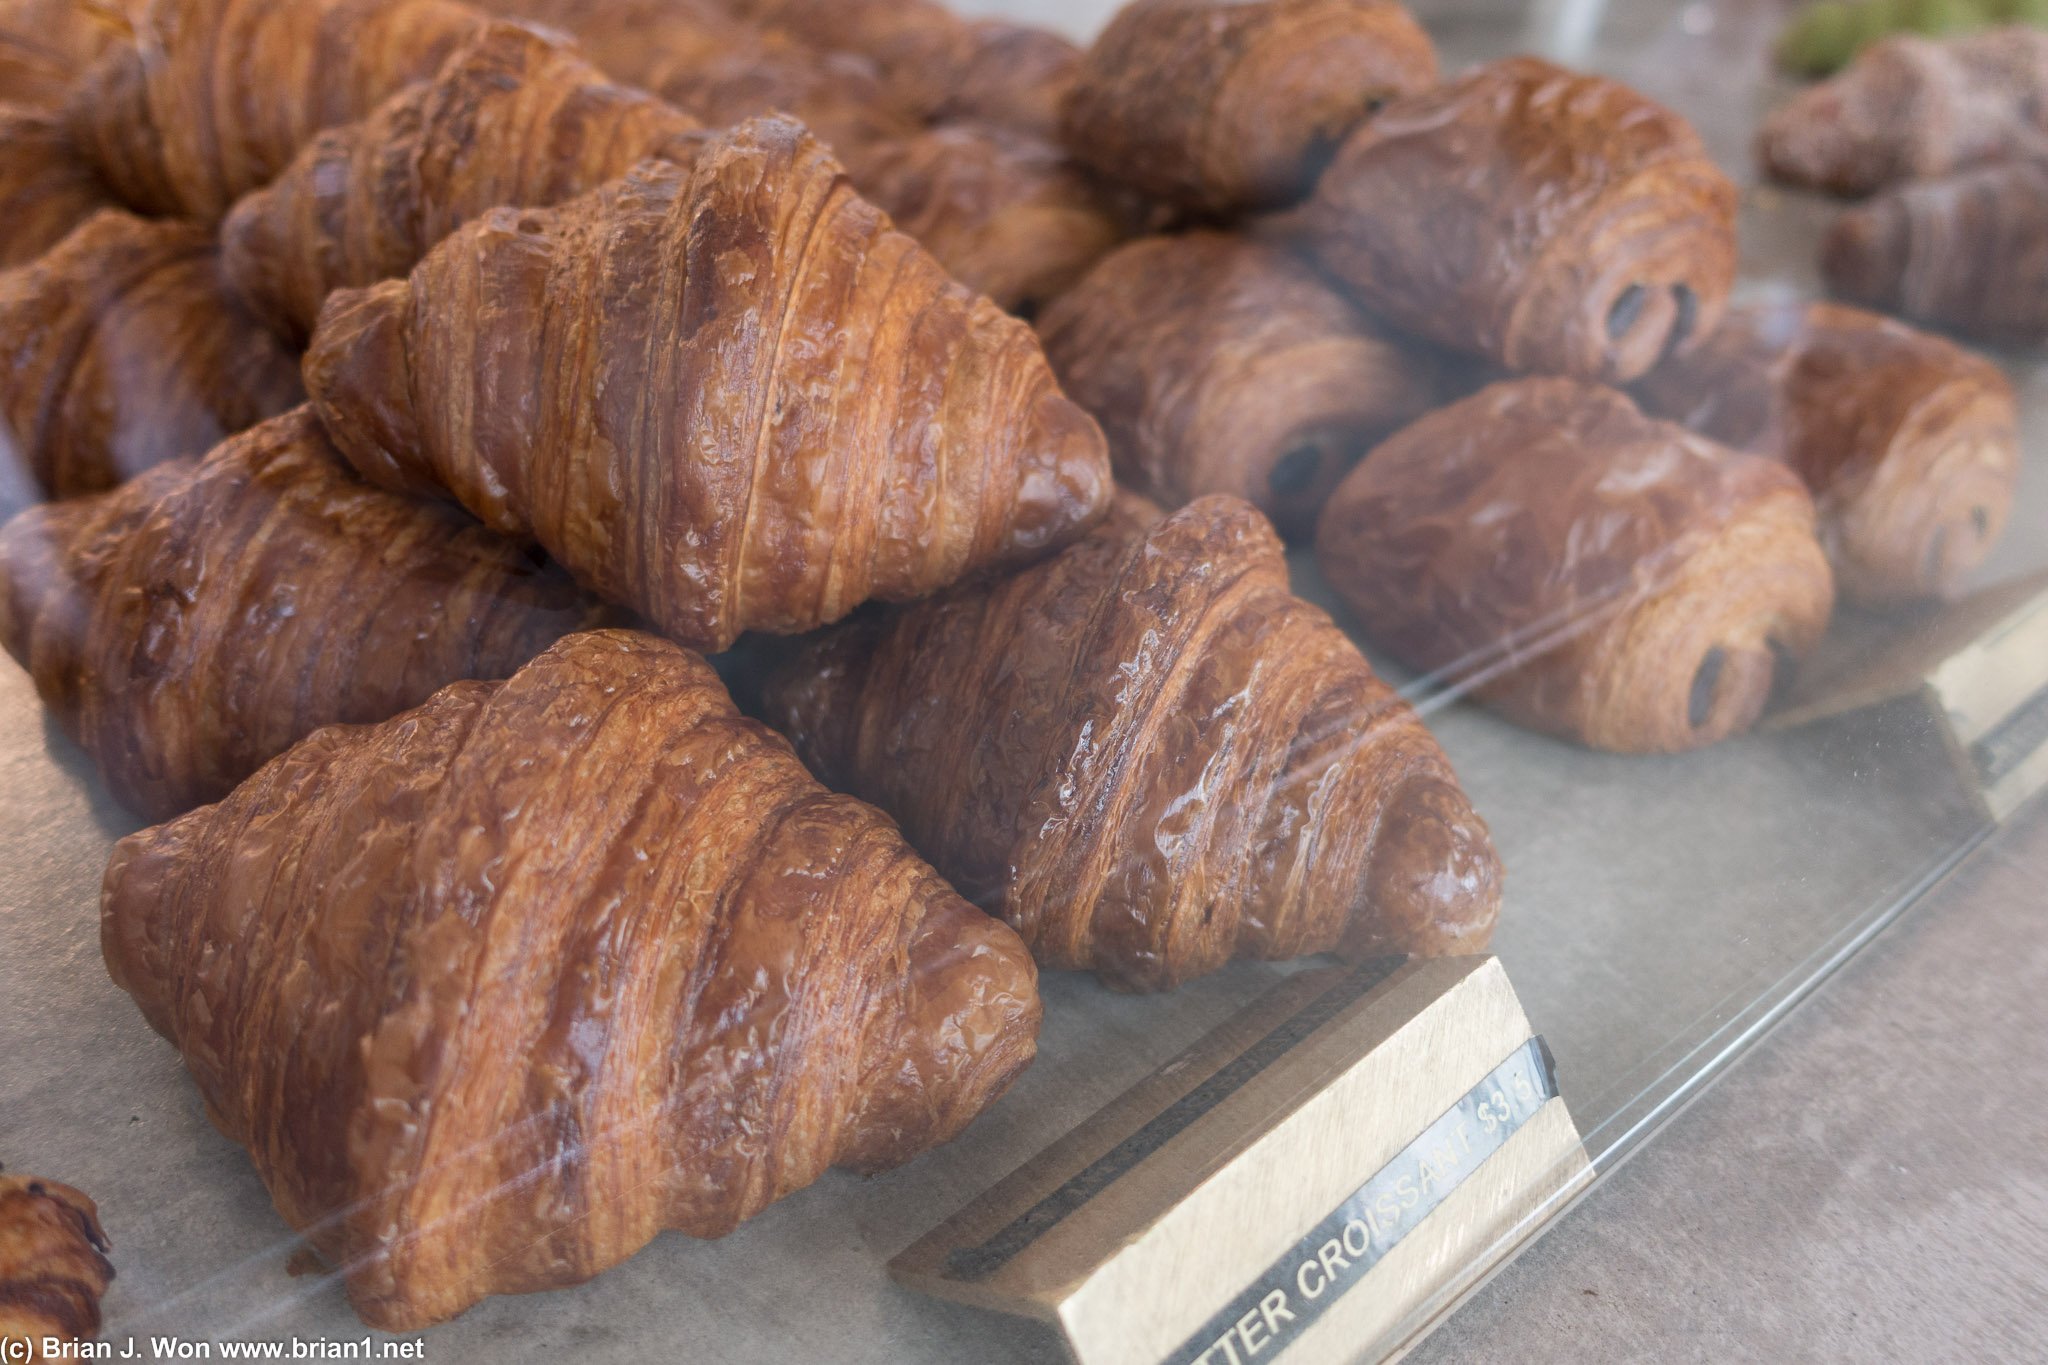 Fresh croissants. Very good, but not quite as good as Proof Bakery.